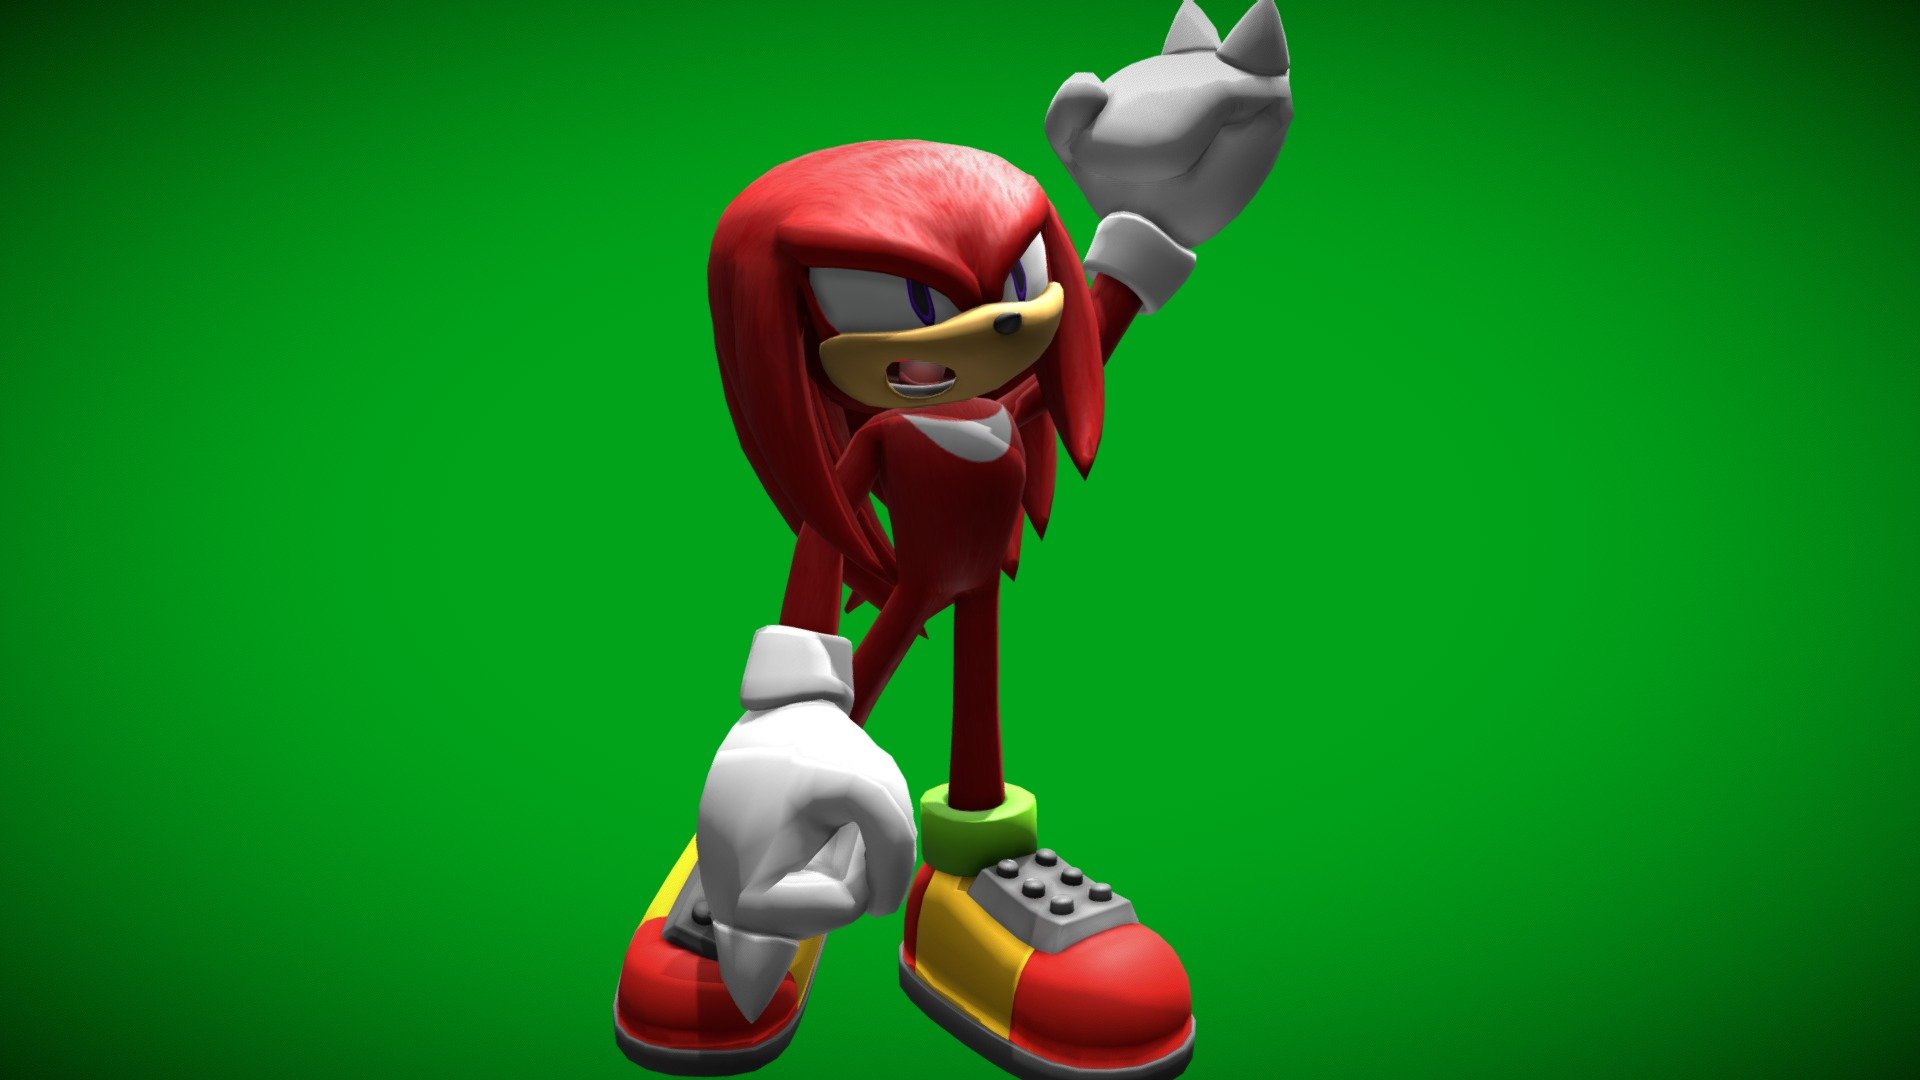 Kunckles The Echidna free to download, but if you use it for anything please give credit to me the creator. Thank you - knuckles the echidna - Download Free 3D model by HiddenMatrixYT 3d model